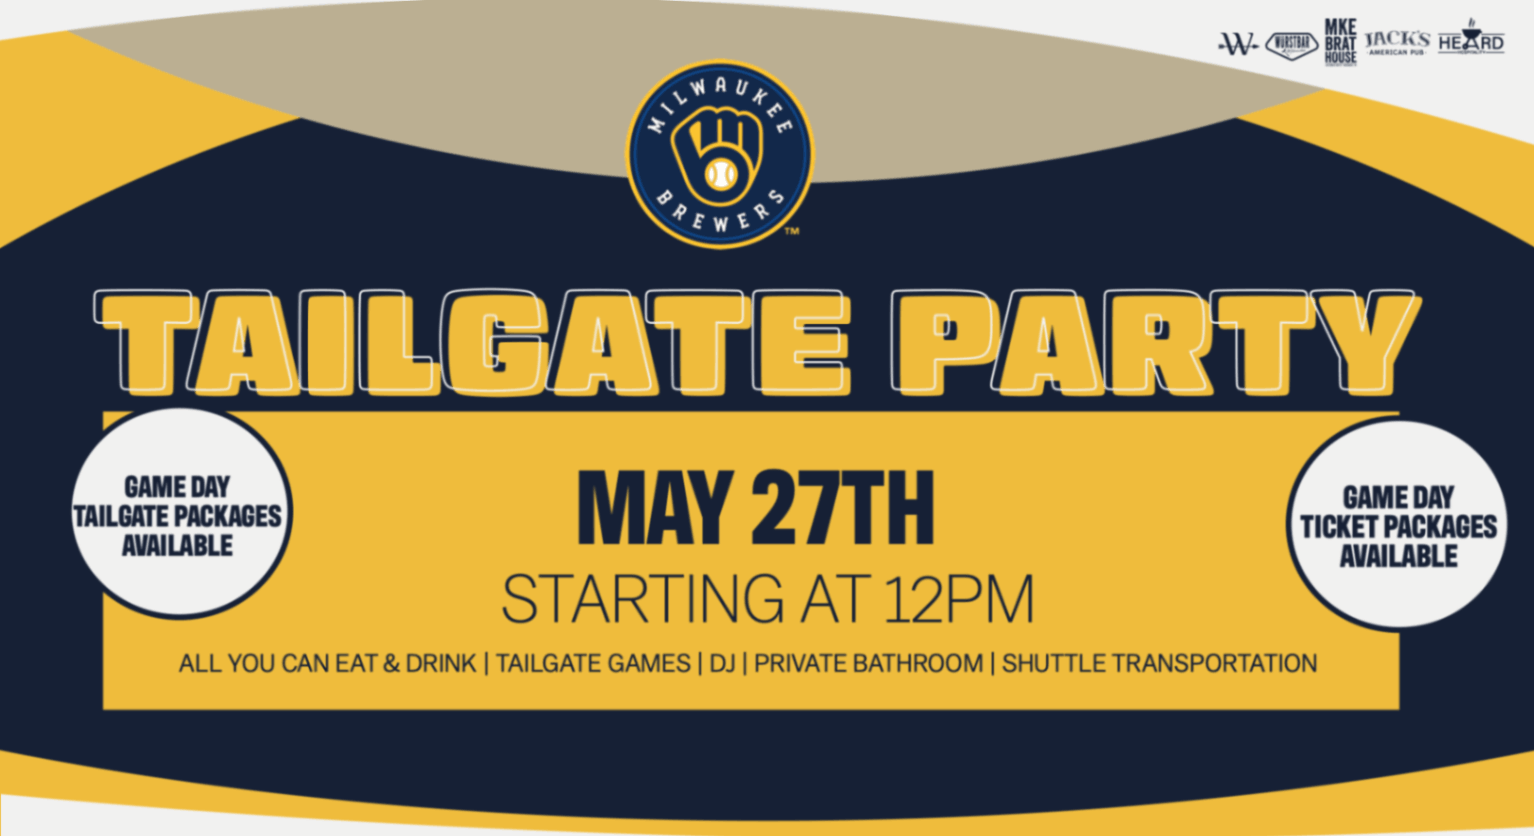 Milwaukee Brat House Party Bus & VIP Tailgate - Brewers vs Cubs